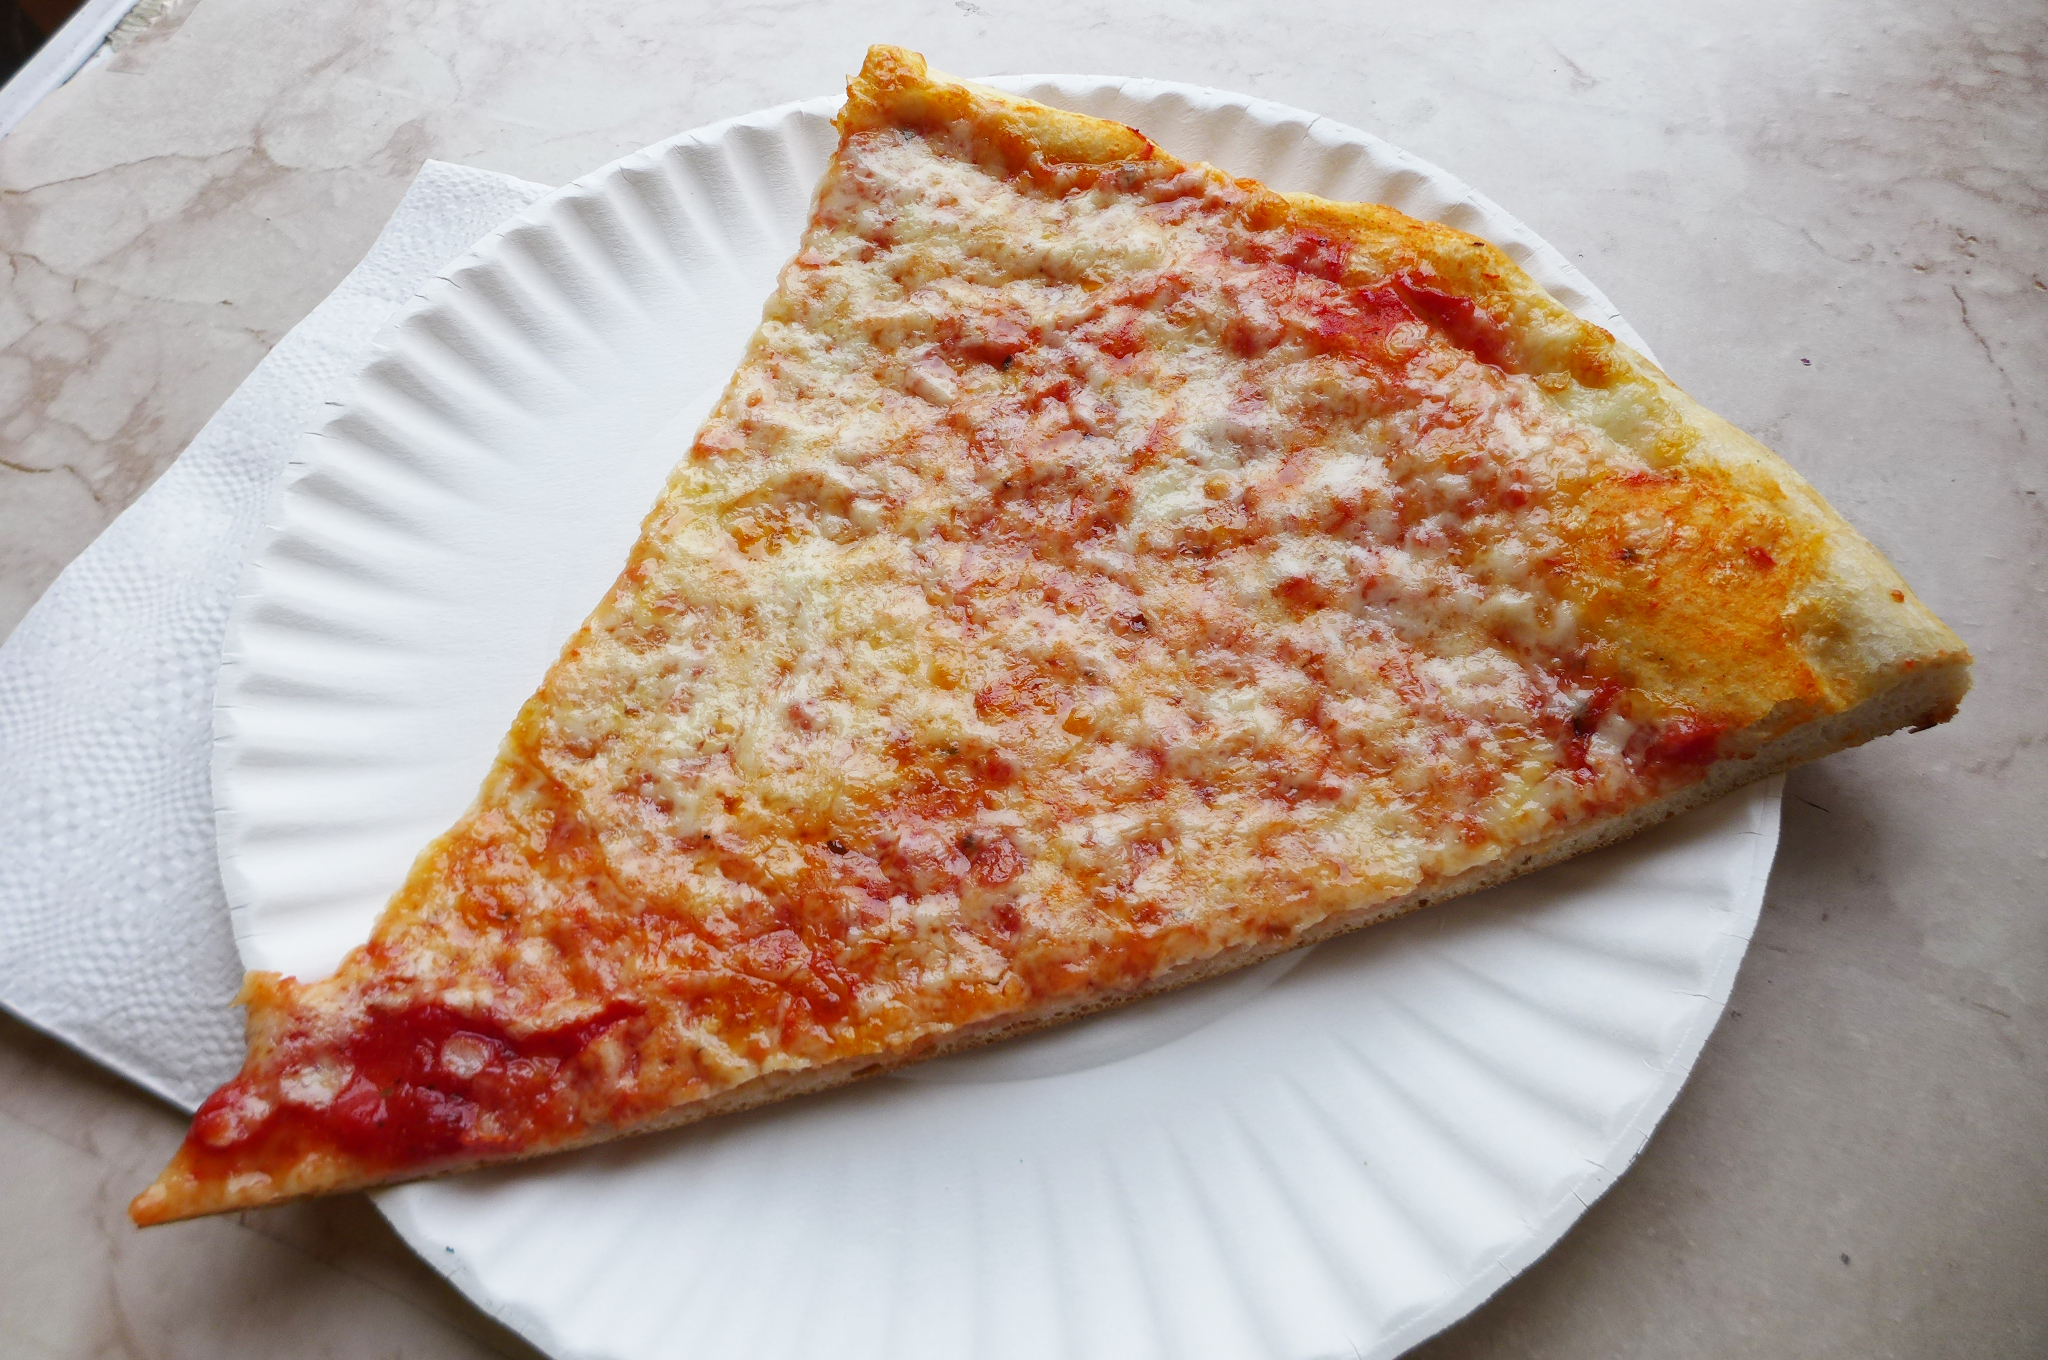 A pizza slice with a modest amount of sauce and stippled with cheese on a paper plate.